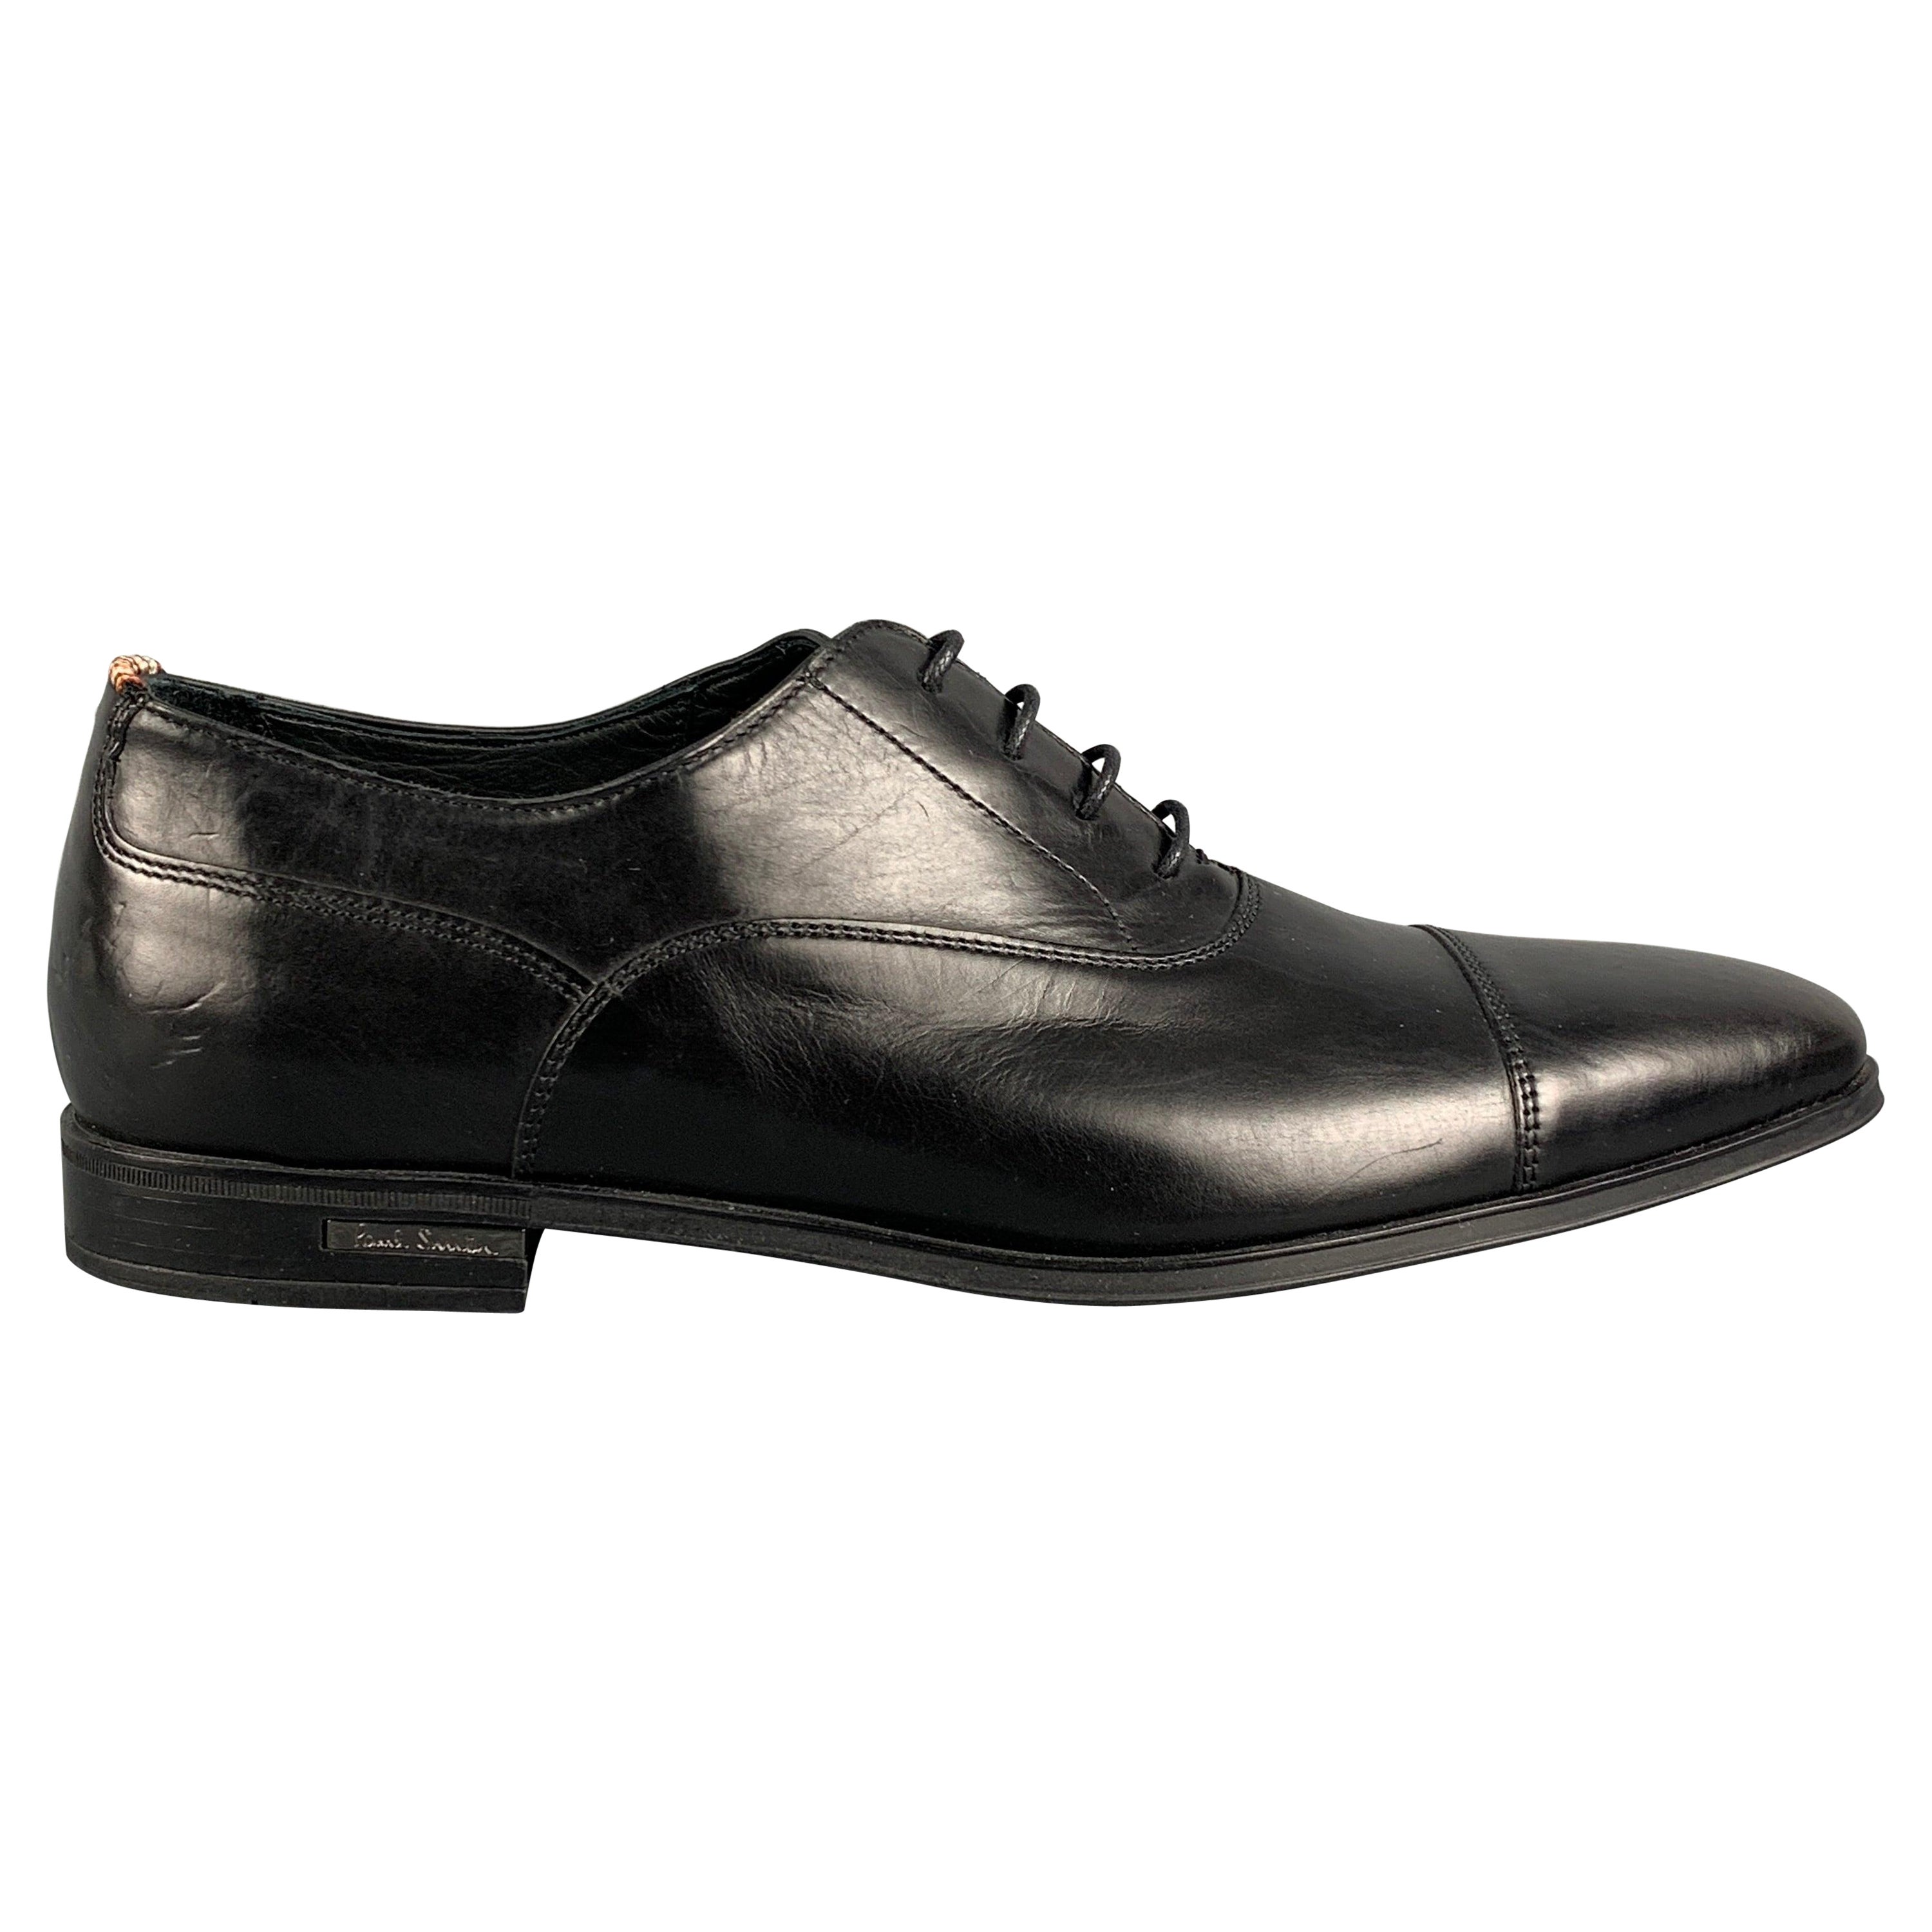 PAUL SMITH Size 8 Black Leather Lace Up Dress Shoes For Sale